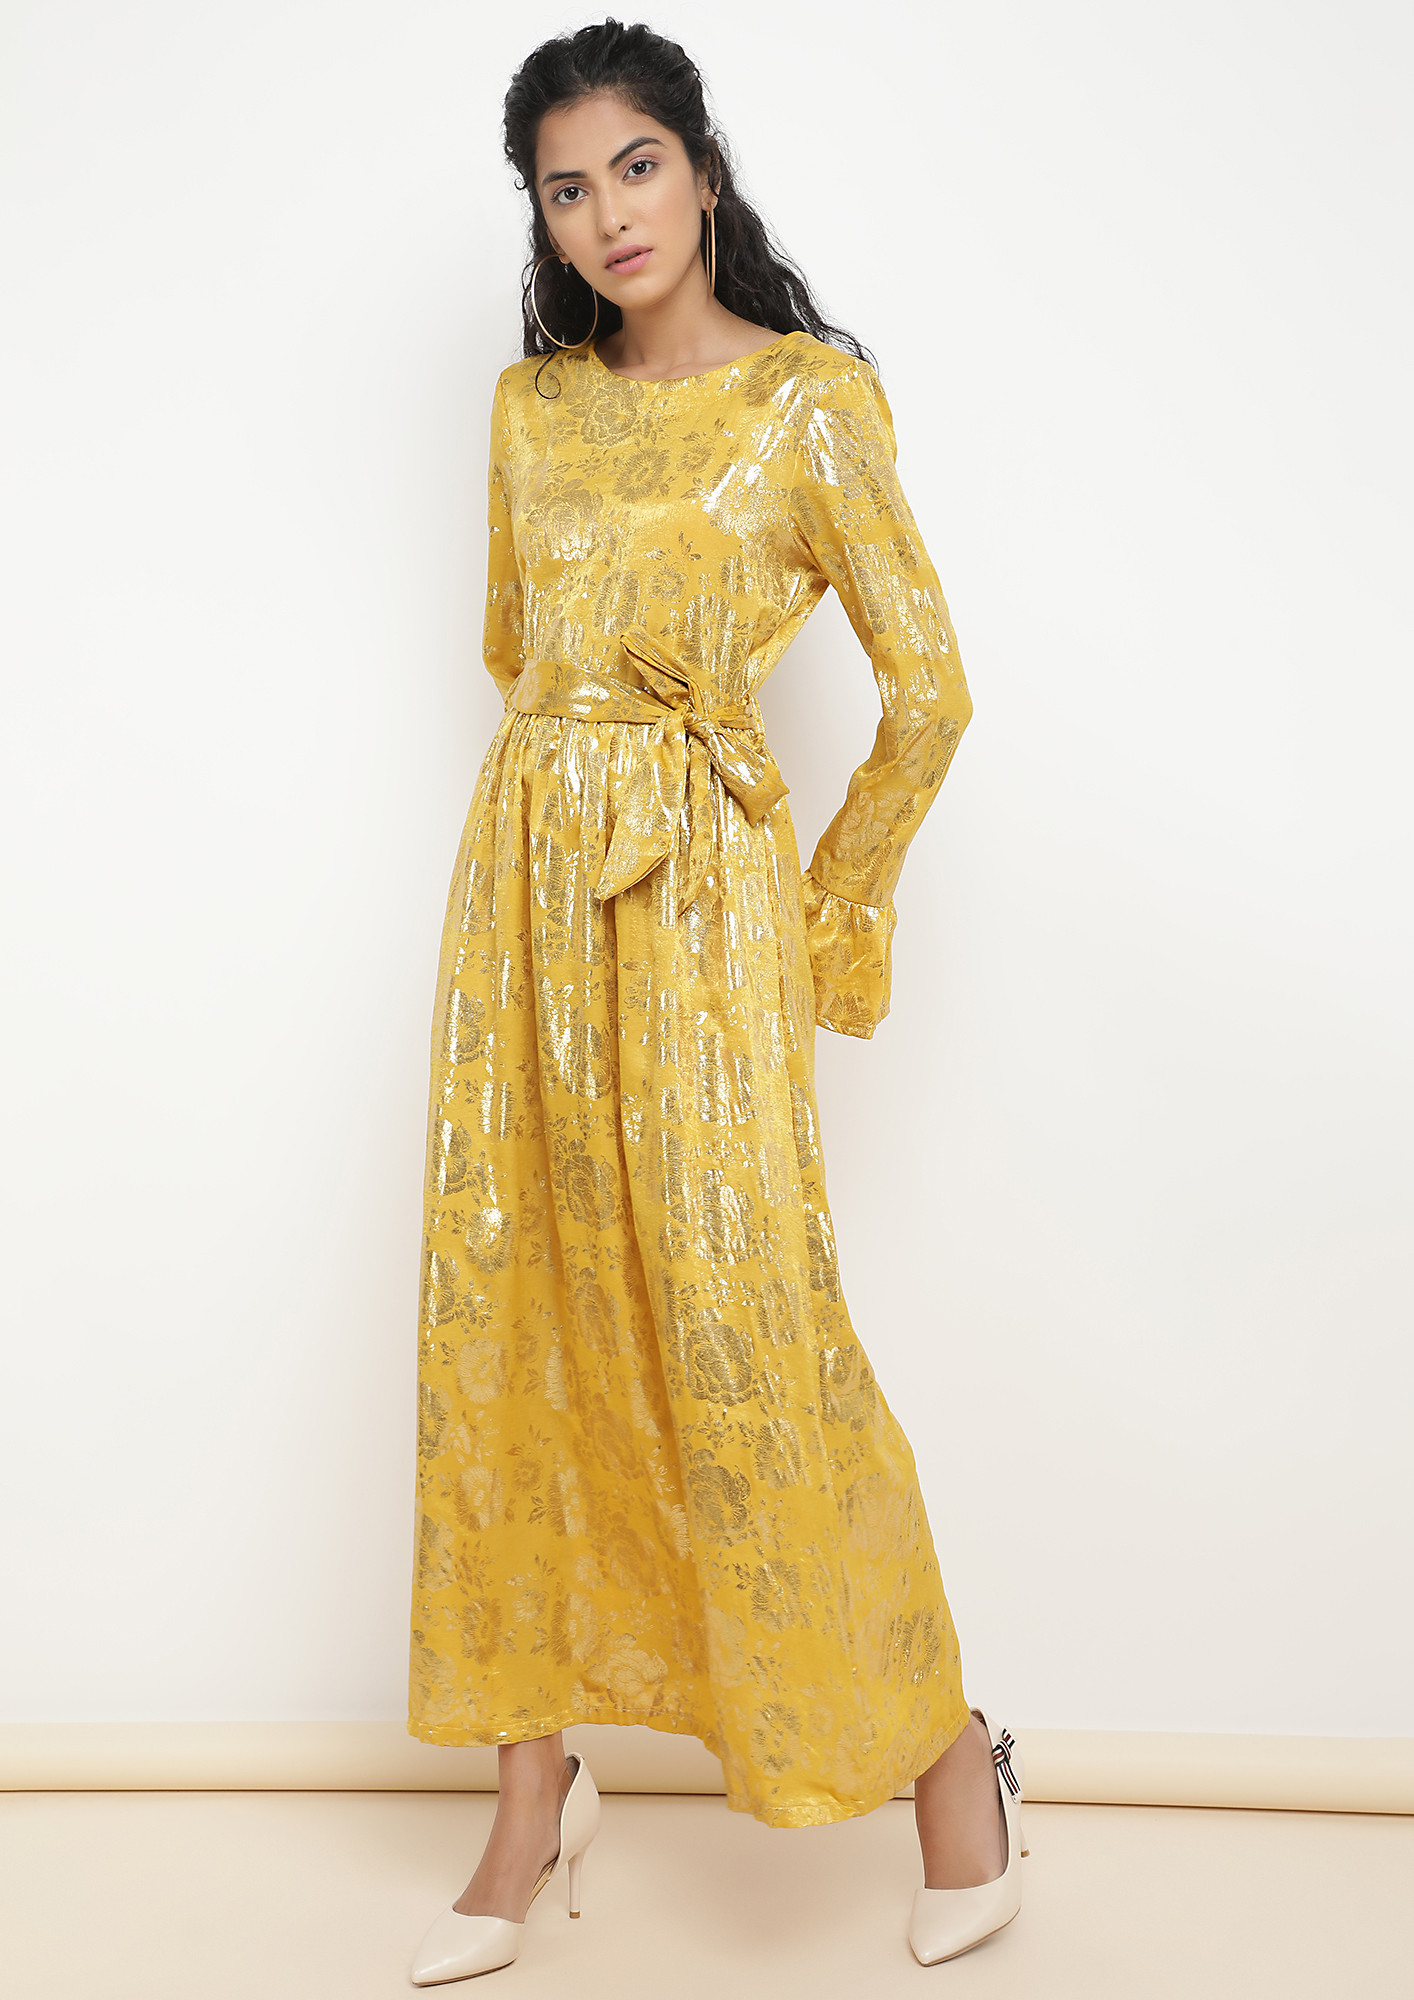 FLOWY AND SPARKLY YELLOW MAXI DRESS